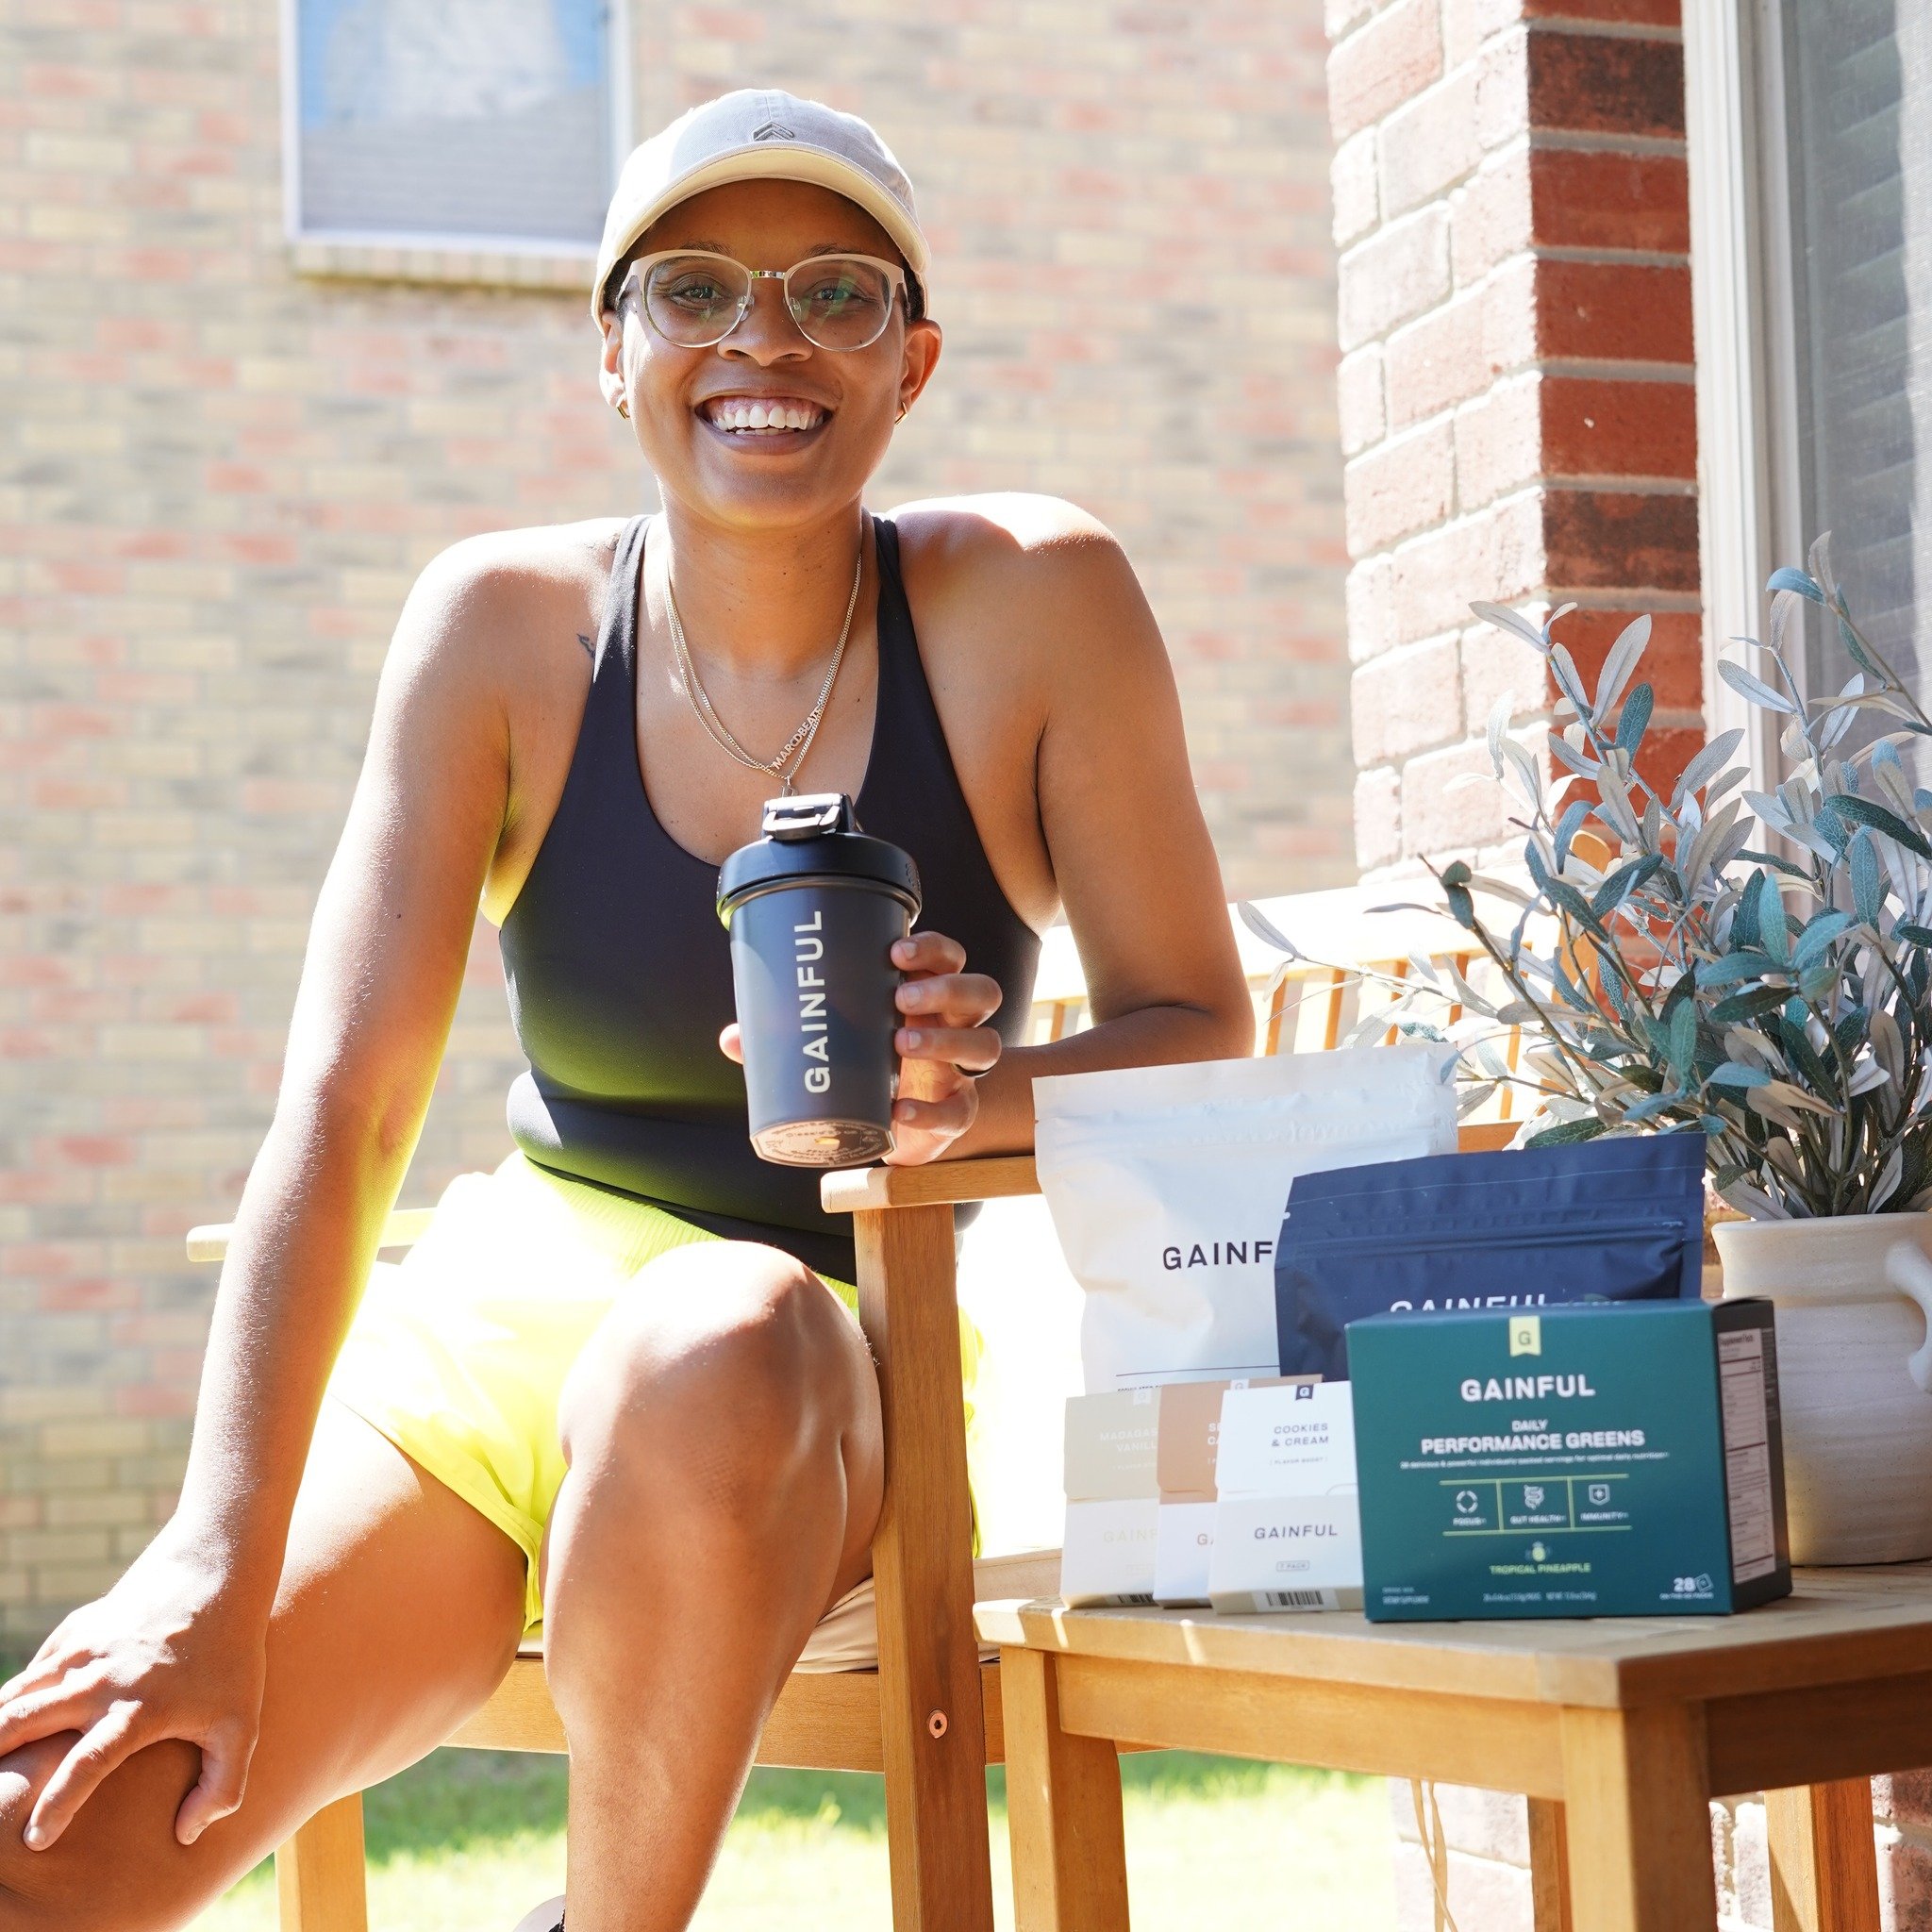 #AD | Starting your health &amp; wellness journey can be a bit overwhelming sometimes. That&rsquo;s where @gainful comes in personalized just for you to help you reach the unique goals you set. Find the right nutrition products customized and curated